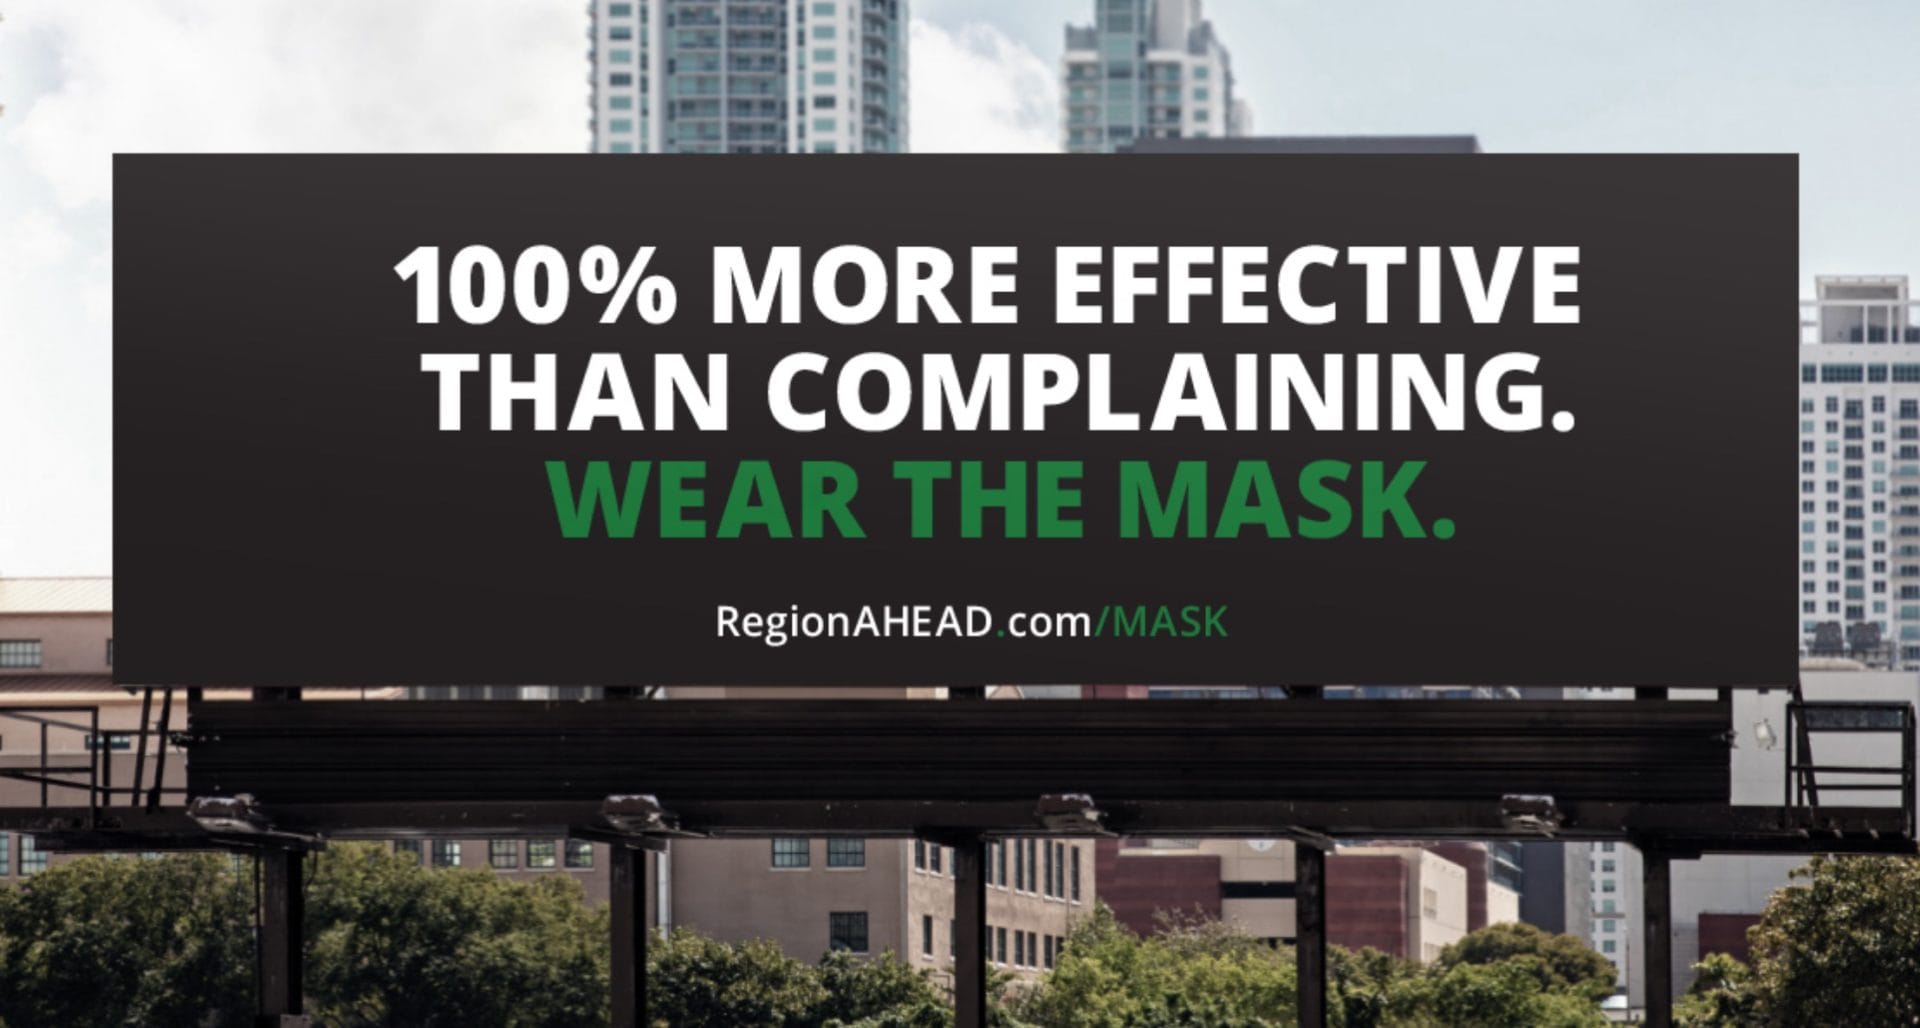 Wear the mask billboard stating that wearing a mask is 100% more effective than complaining.